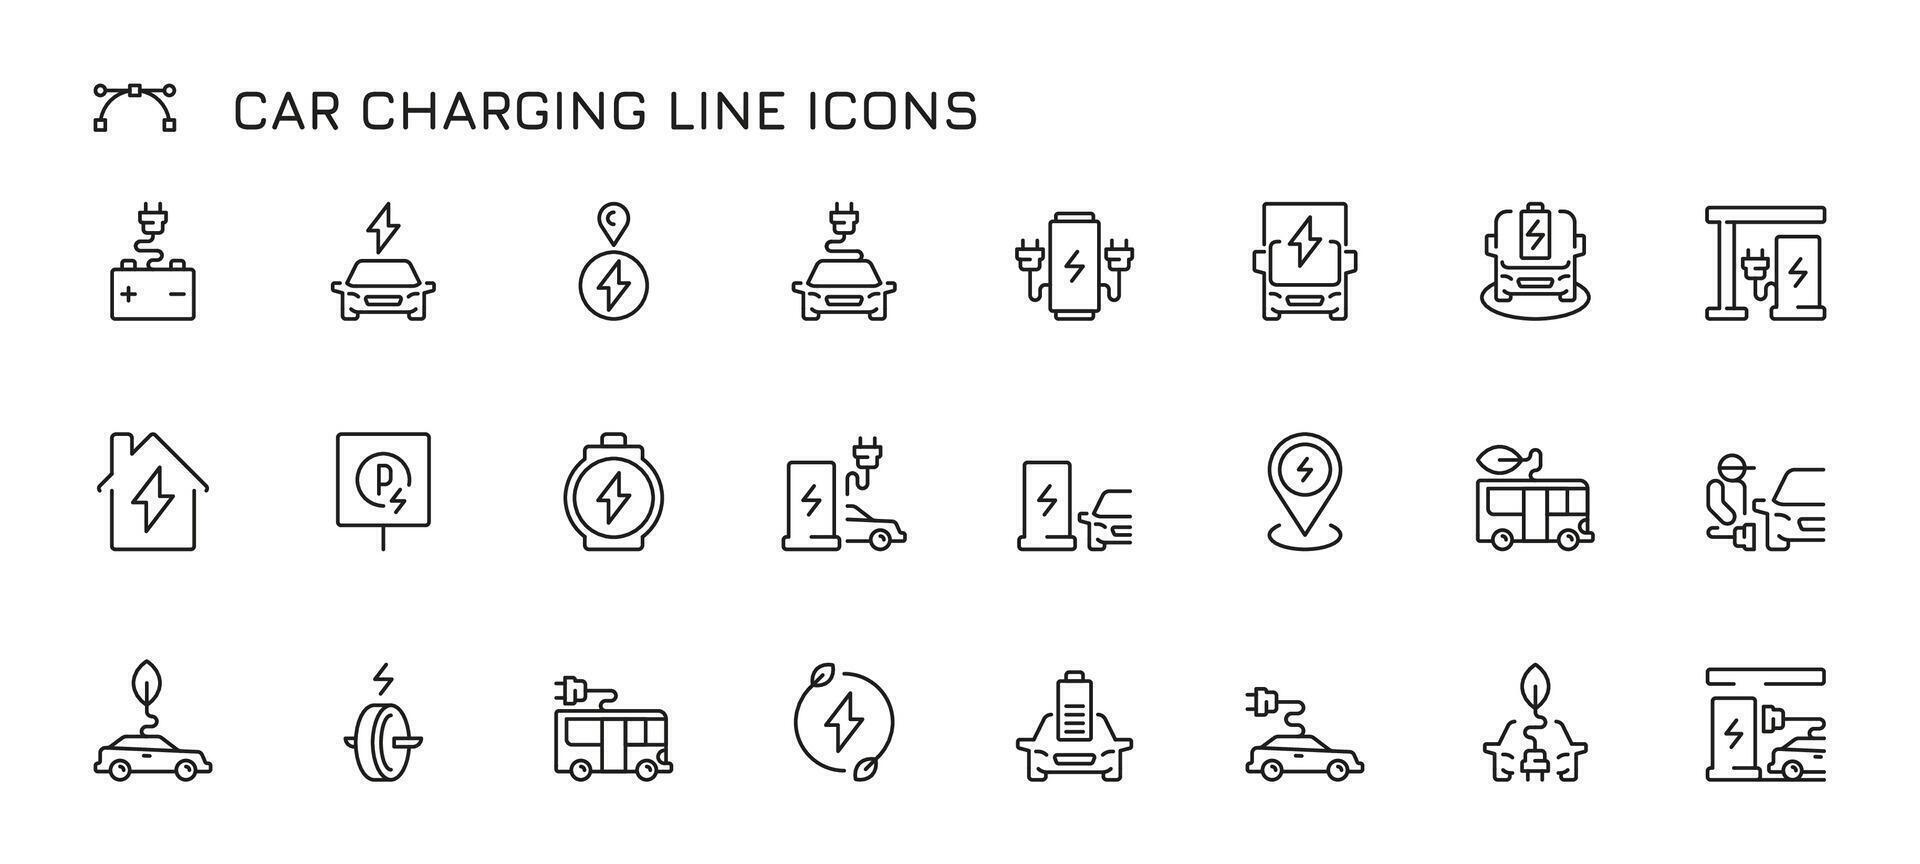 Car charging line icons. Electric vehicle charging line, electric car battery range and time, eco friendly transport concept. Vector set